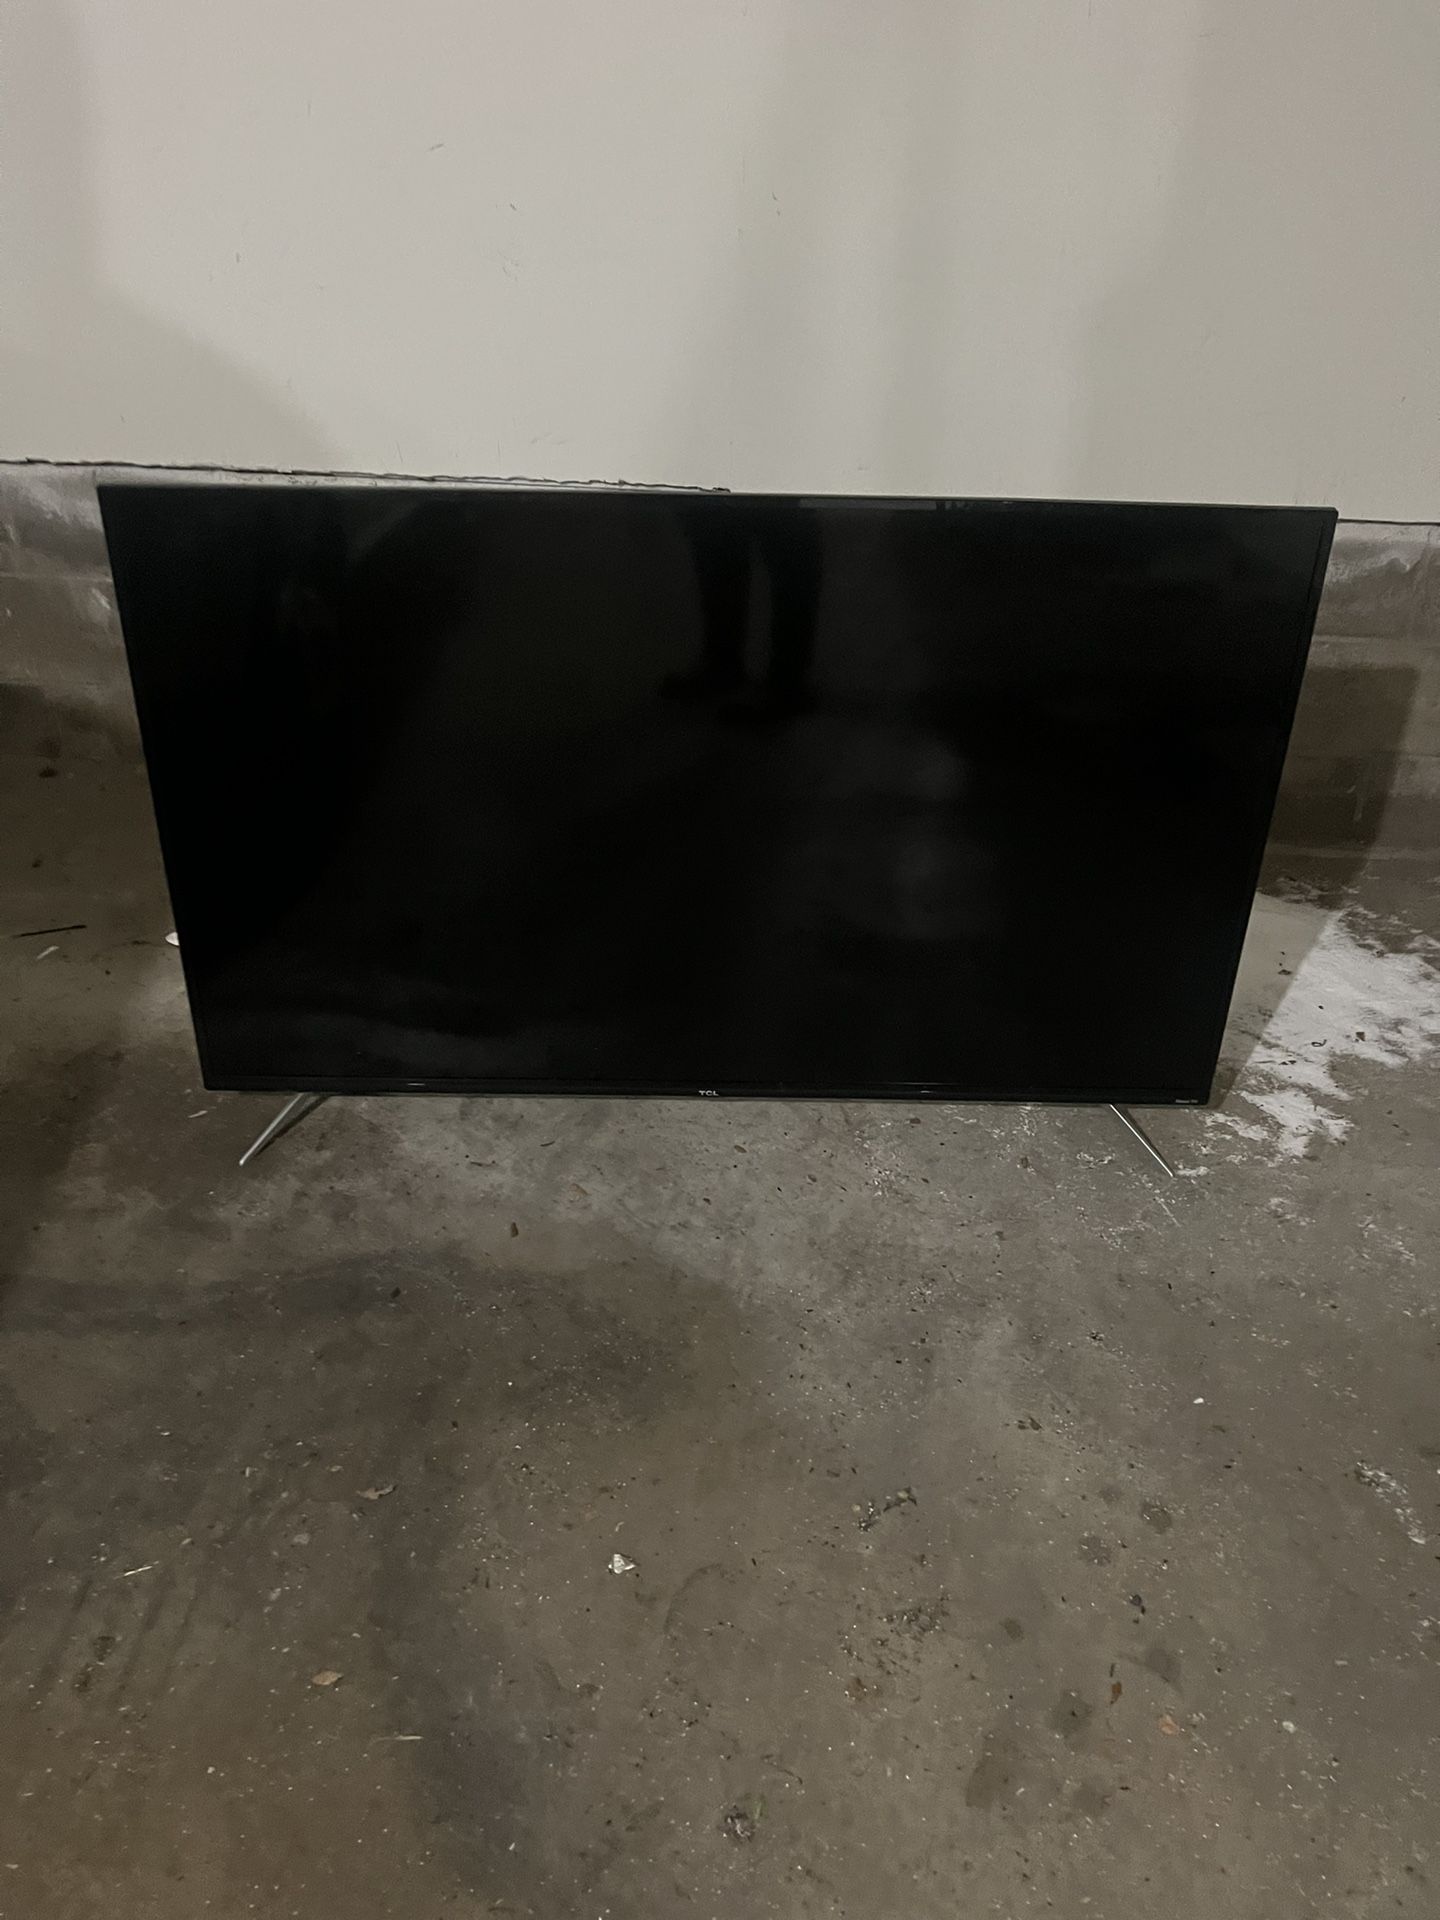 TCL 55S423 55" TV with Broken Screen - Perfect for Parts or Repair!